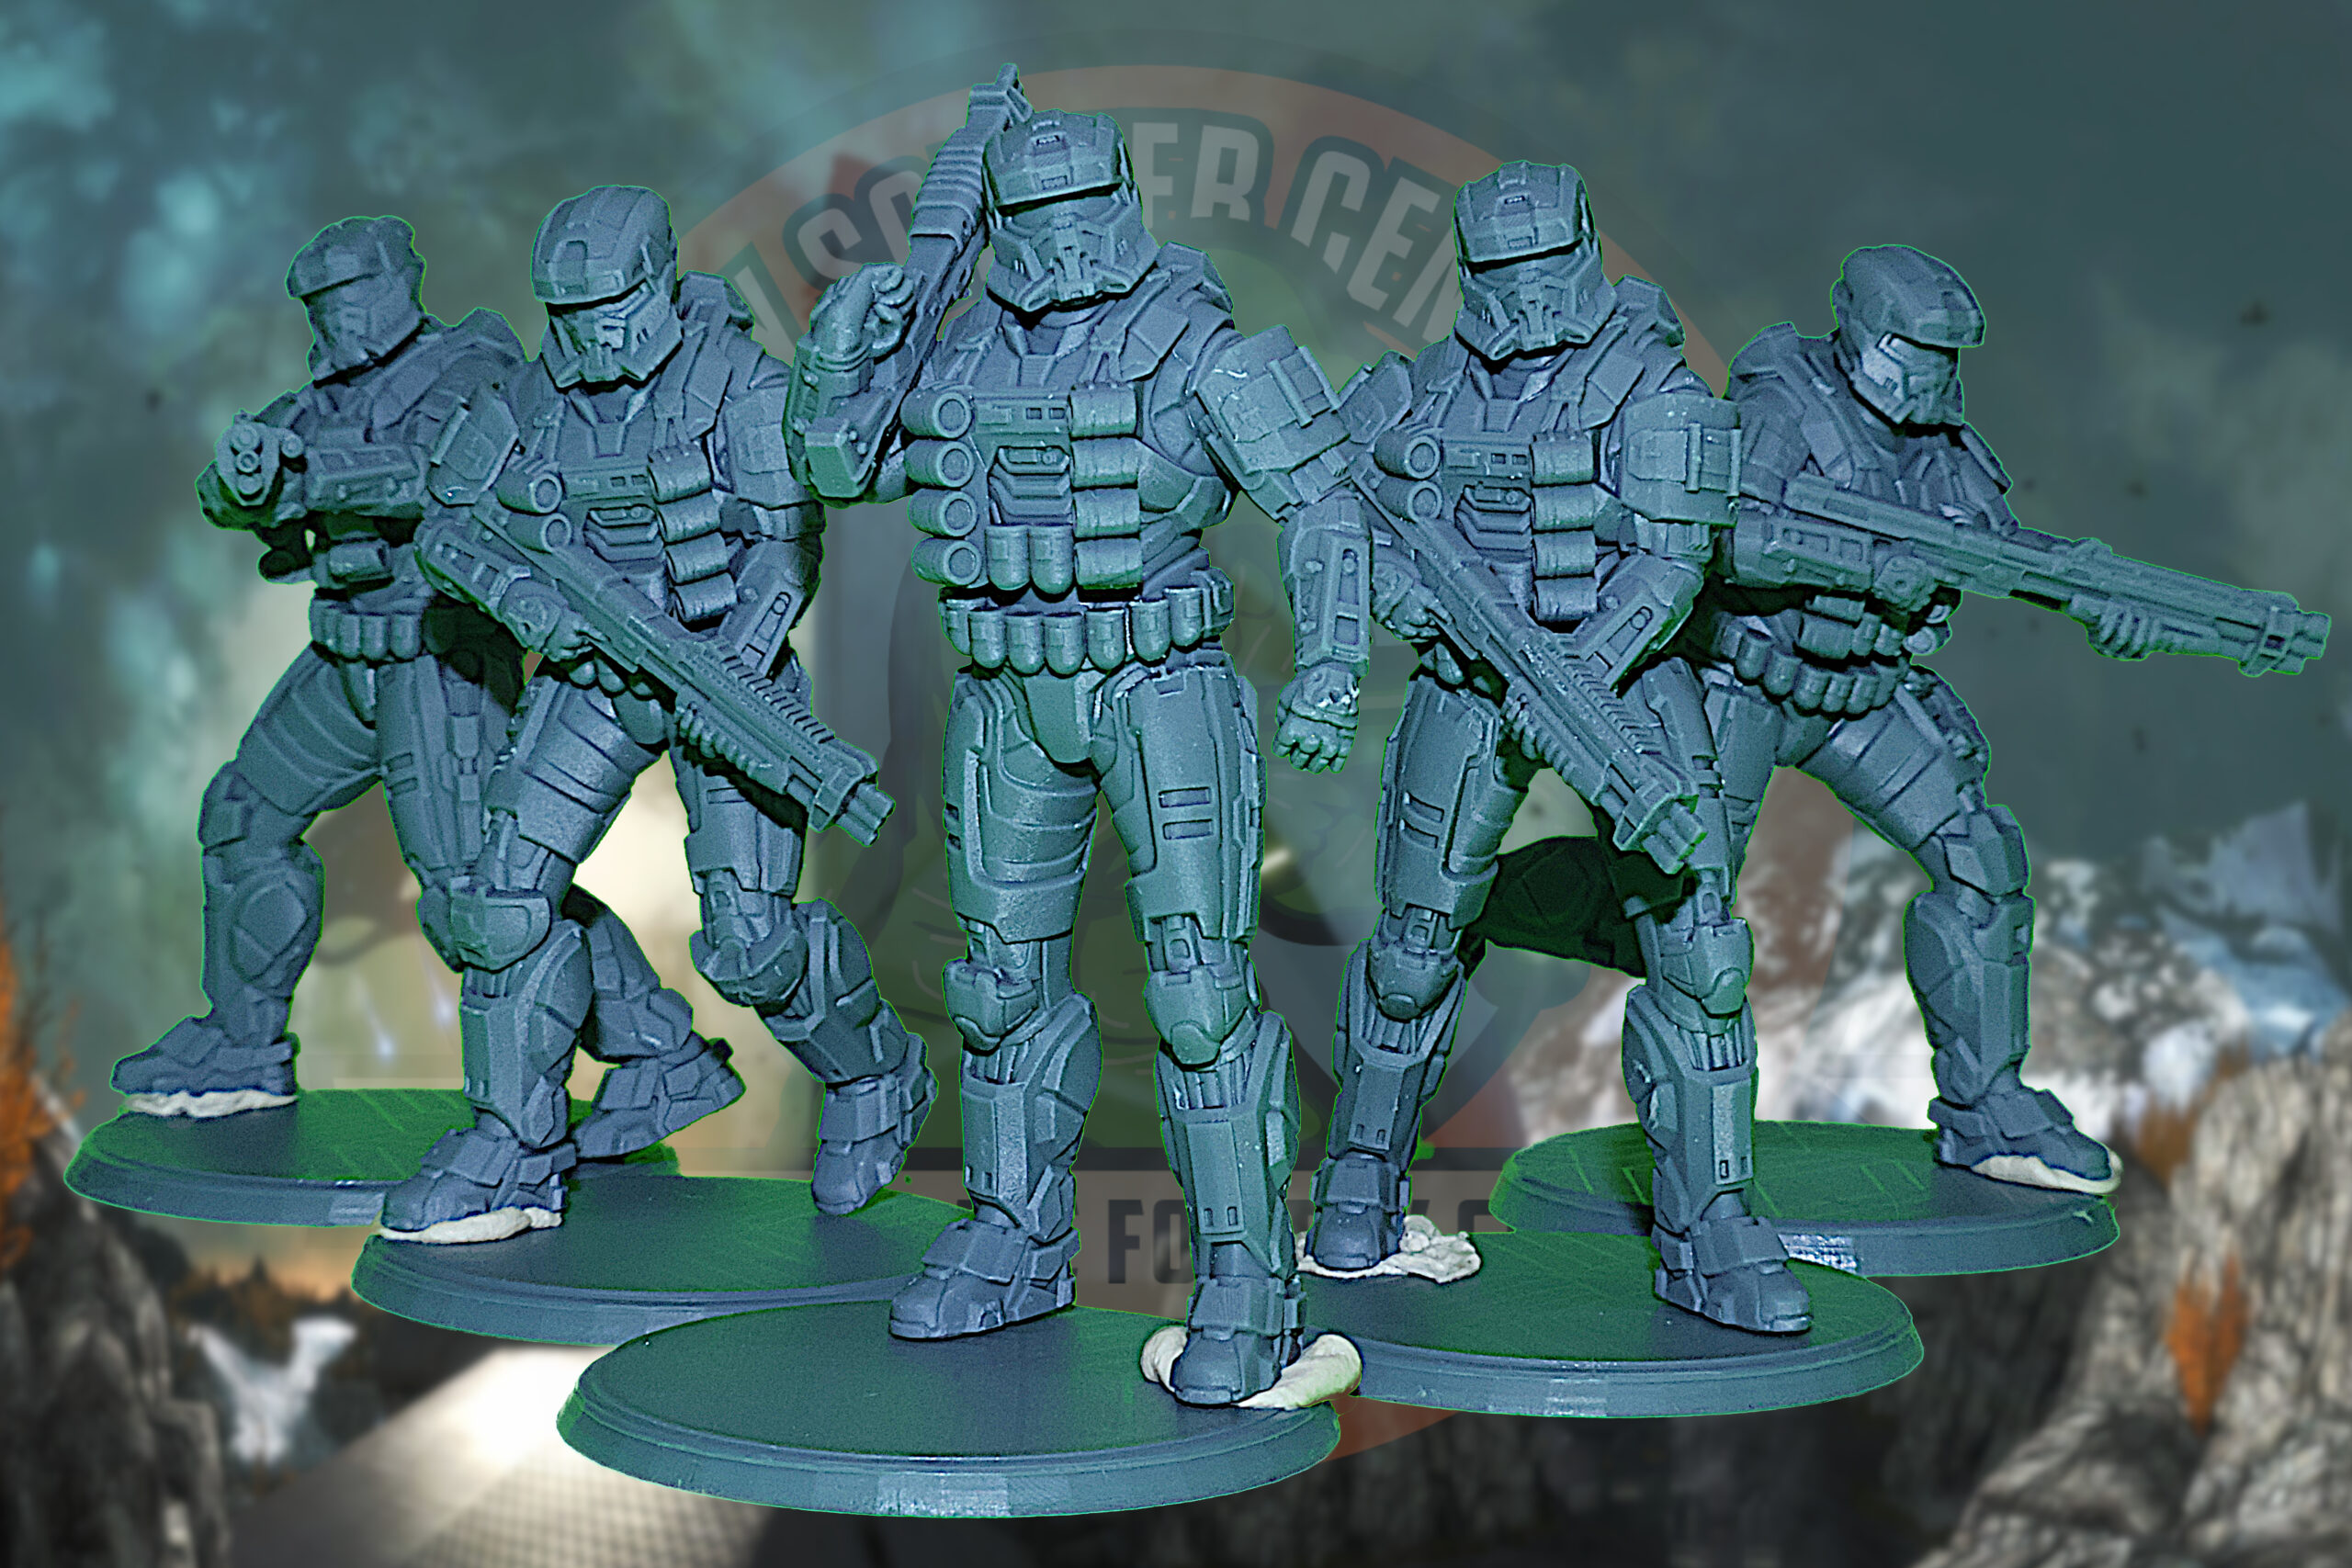 EOD spartan halo reach toy soldiers